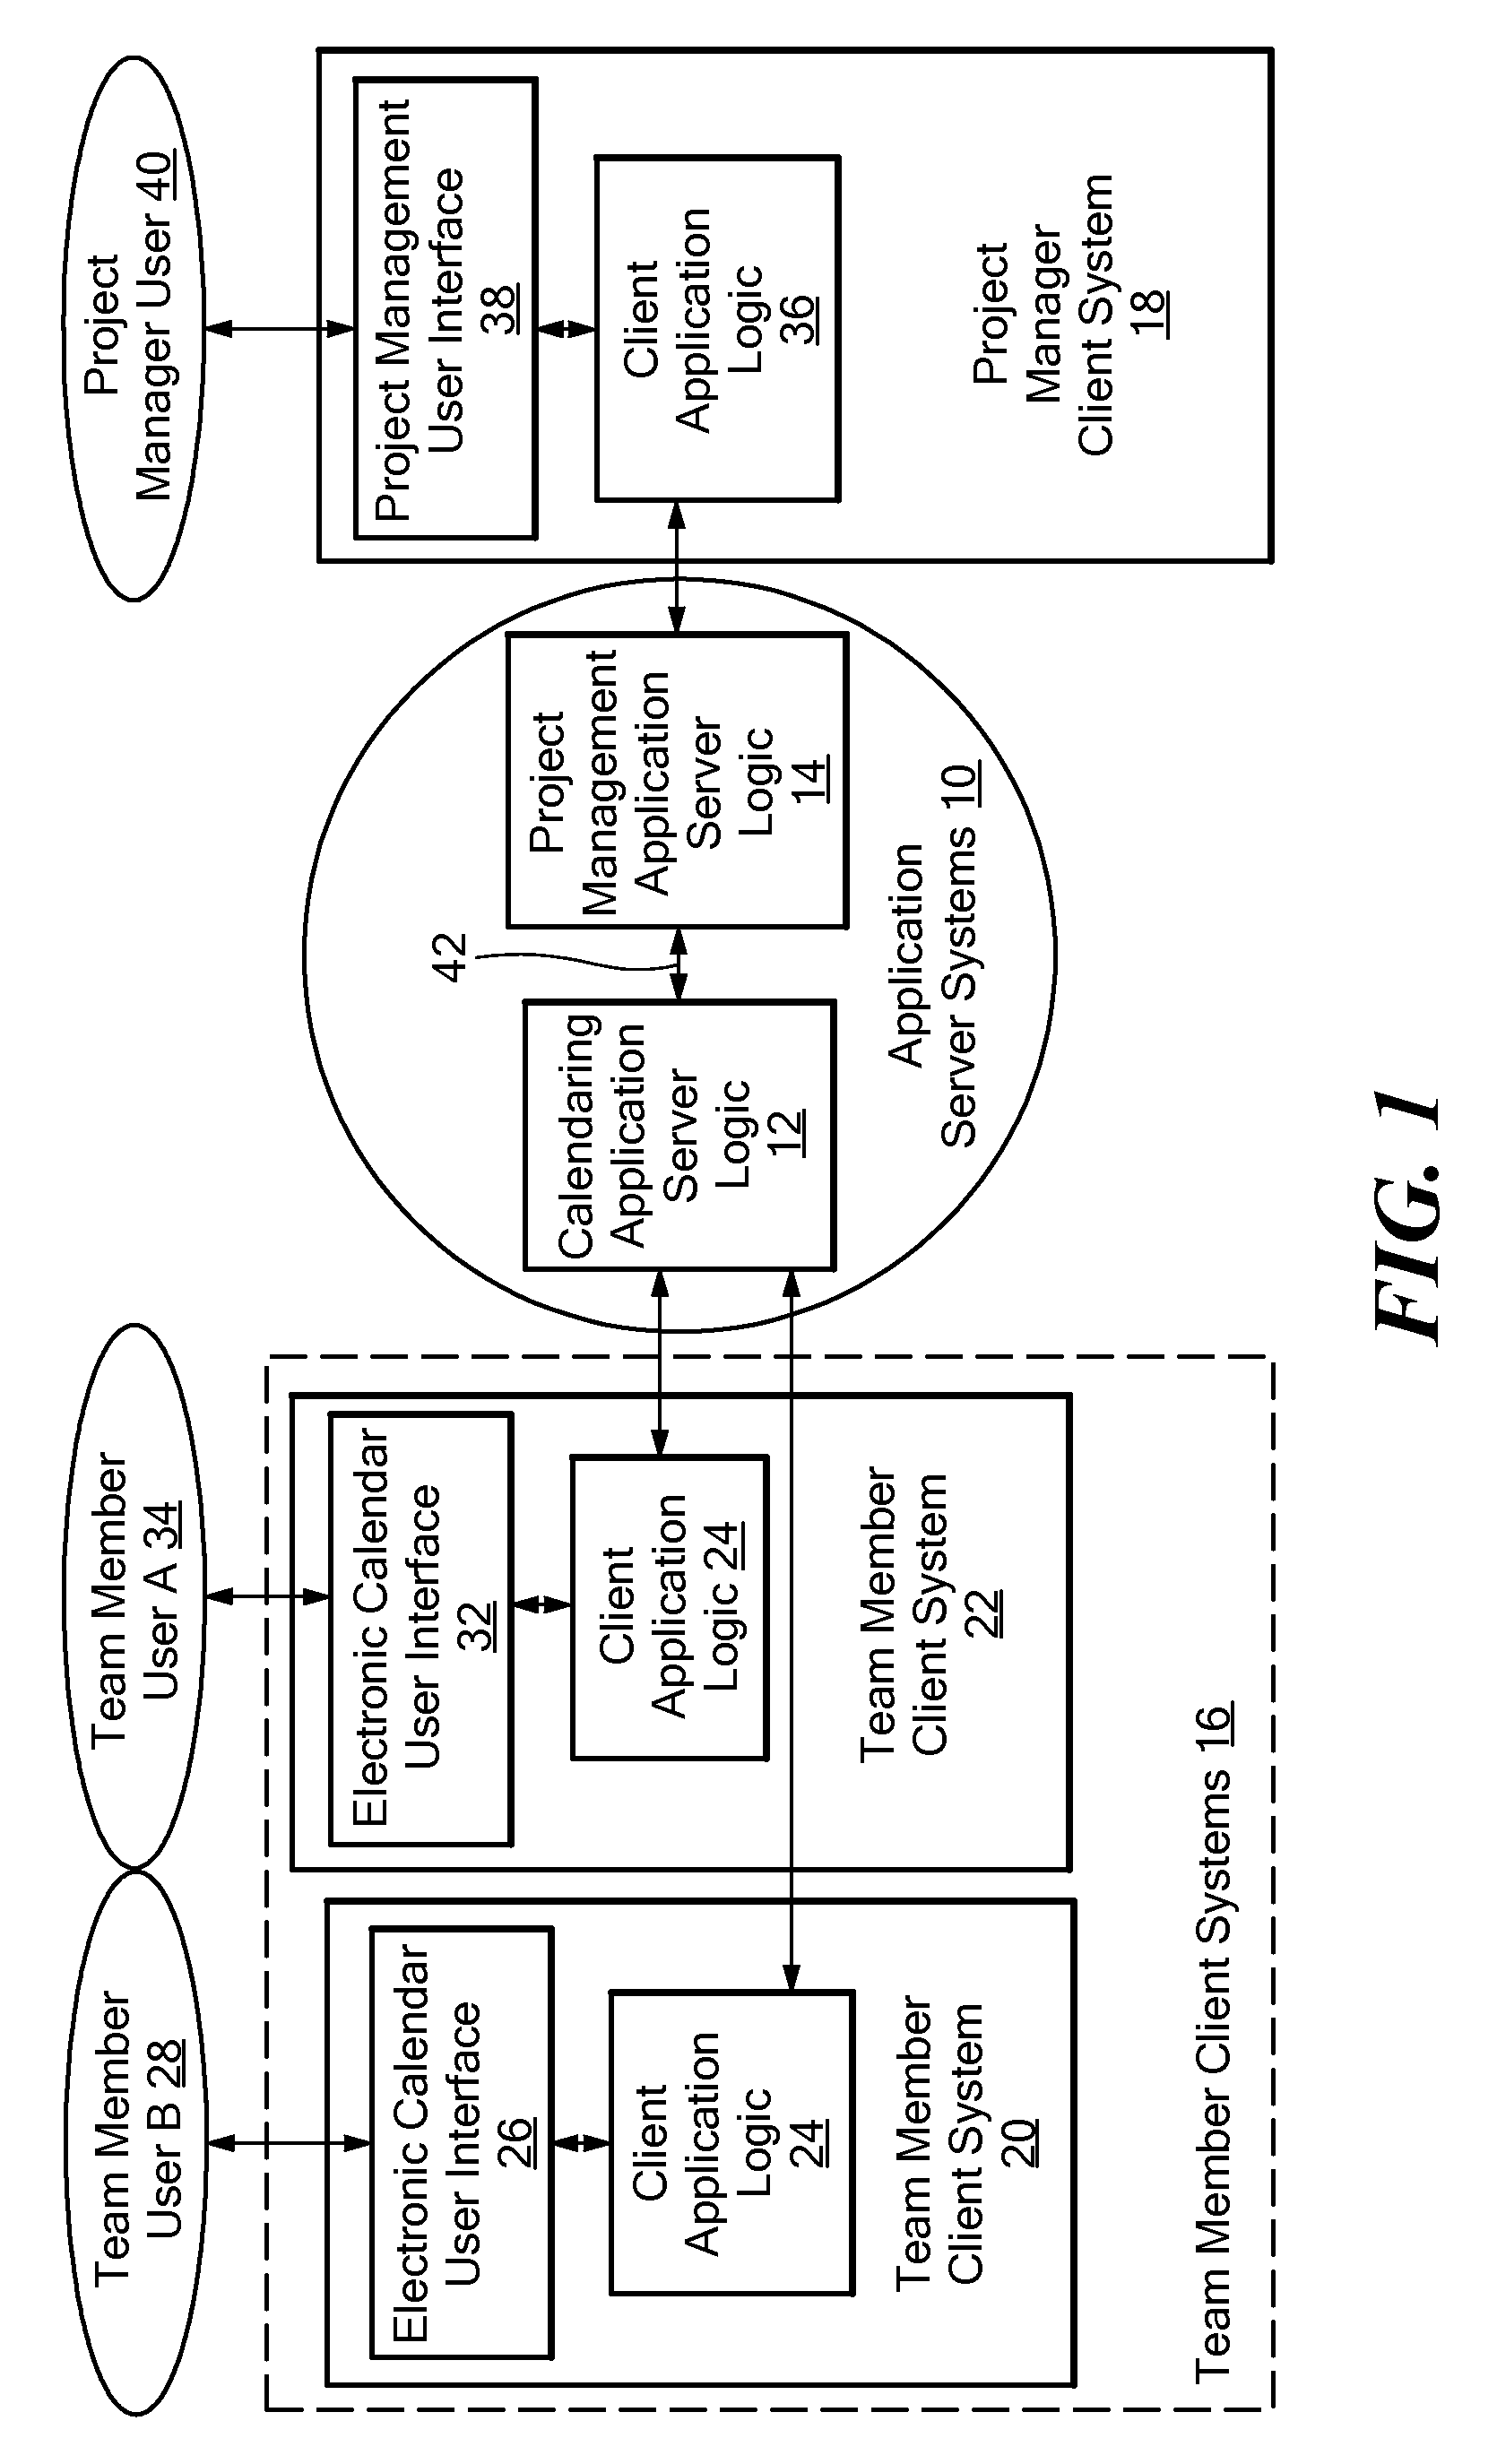 Method and system for providing a bi-directional feedback loop between project management and personal calendar systems